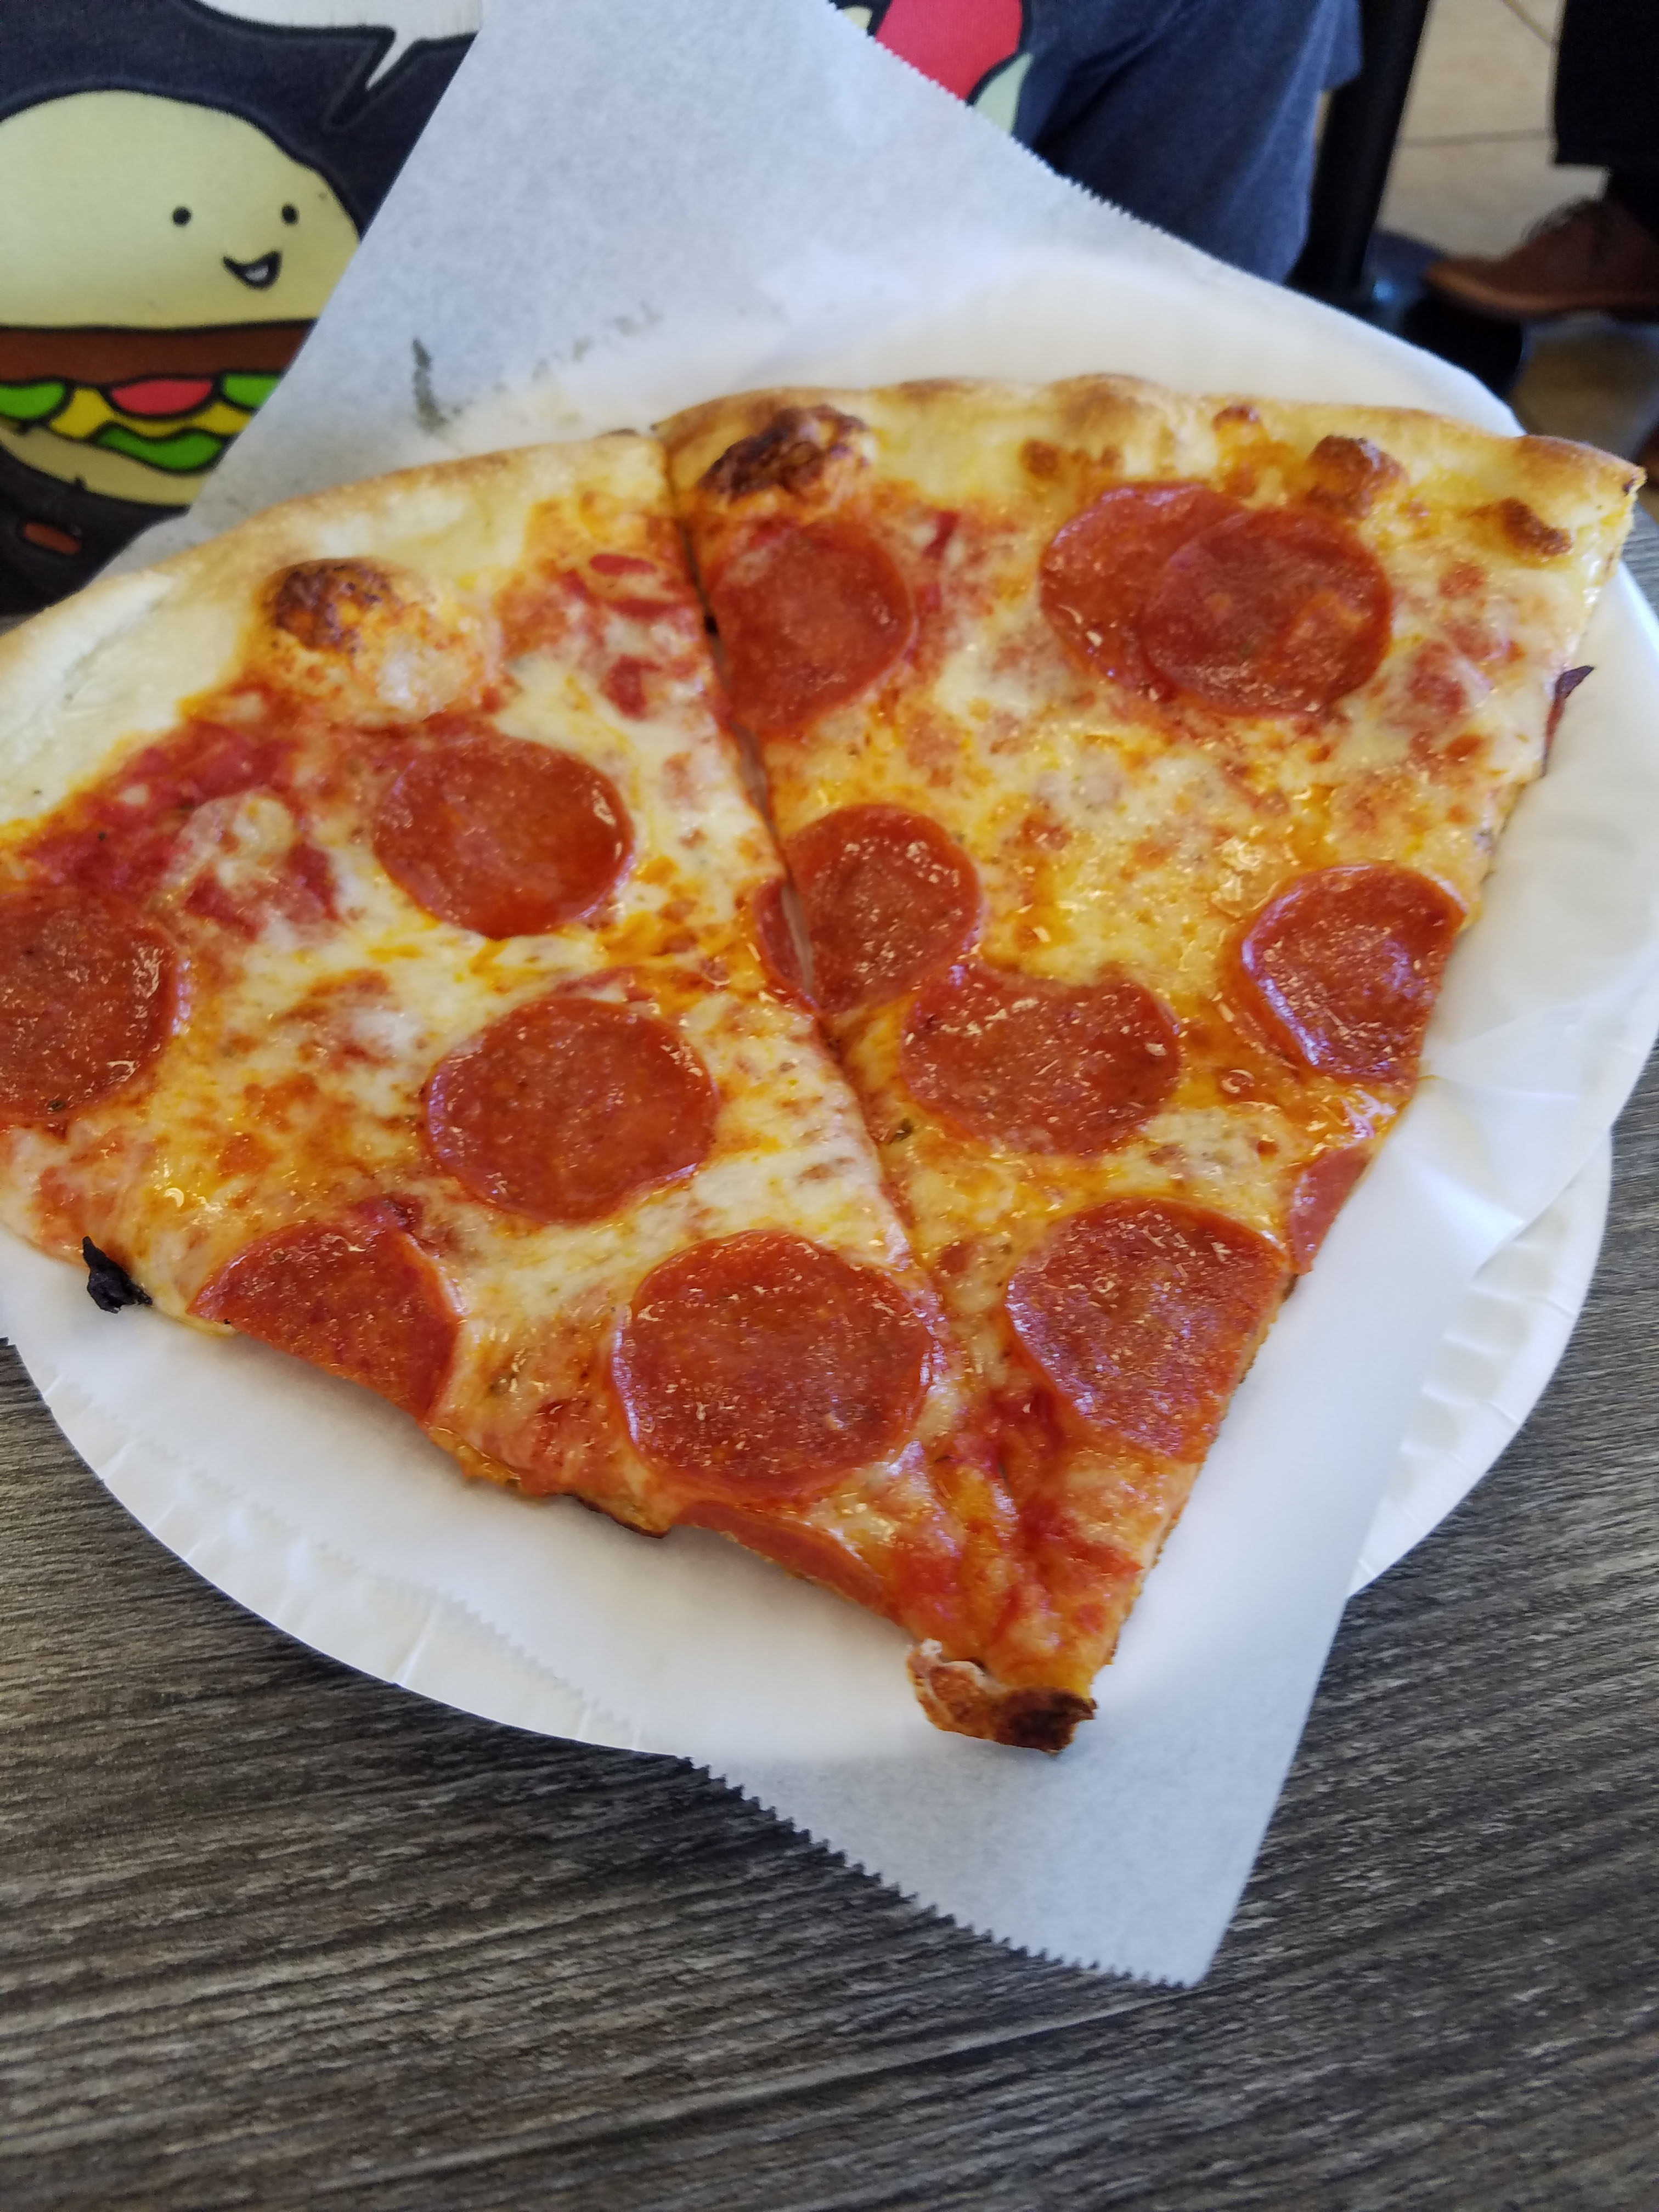 Long Island Mike’s Pizza